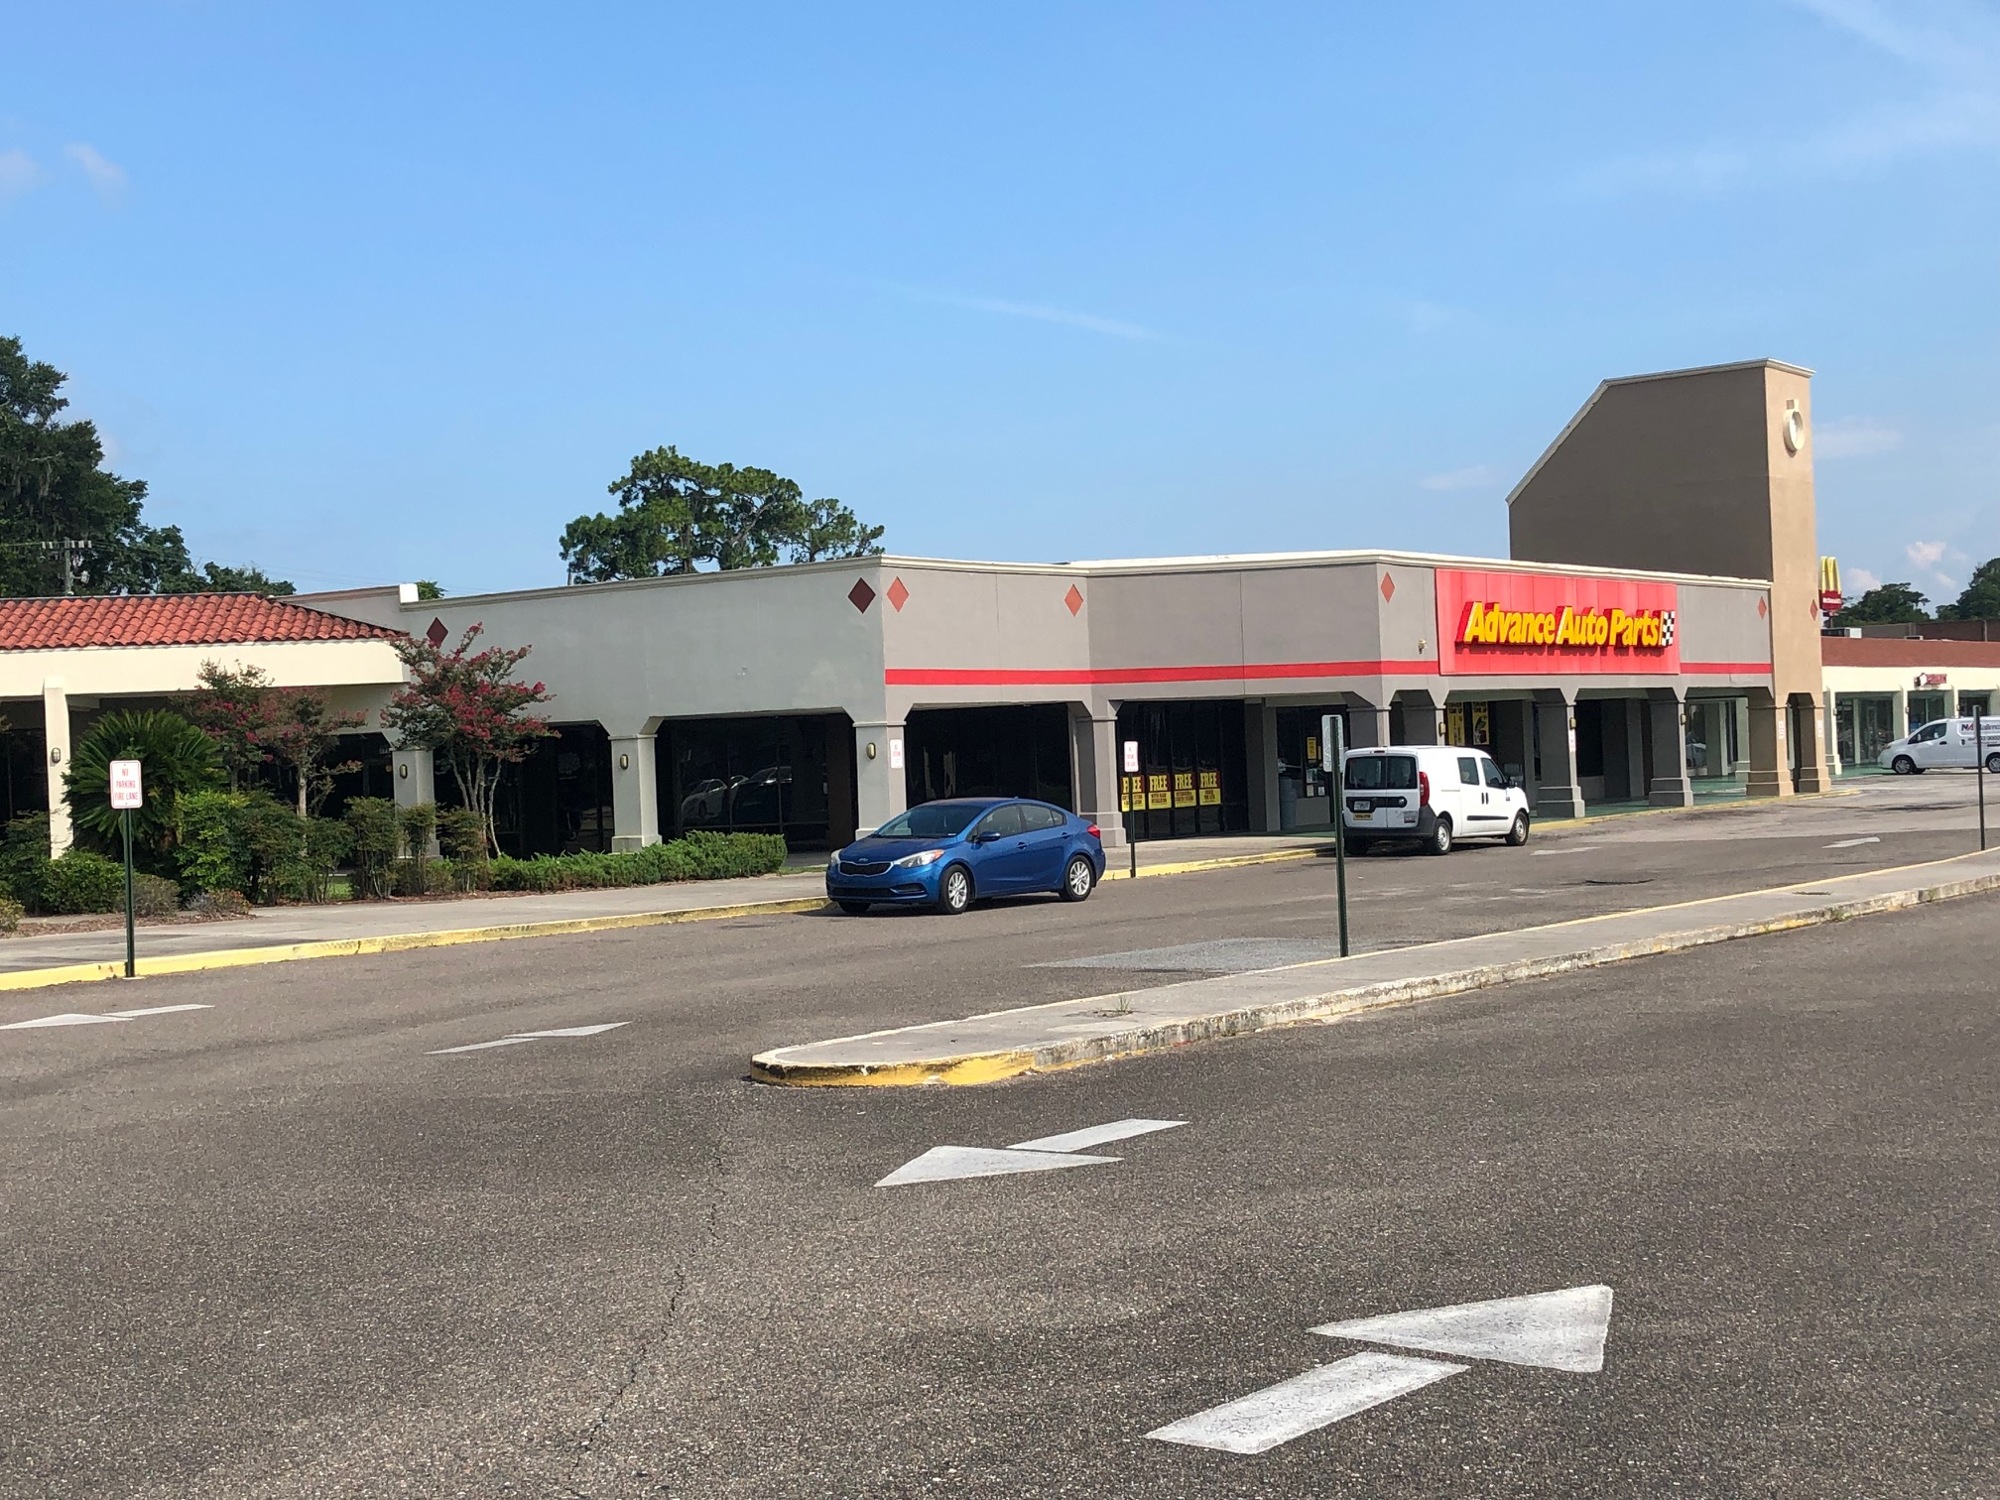 Advance Auto Parts is one of the stores open at College Park.